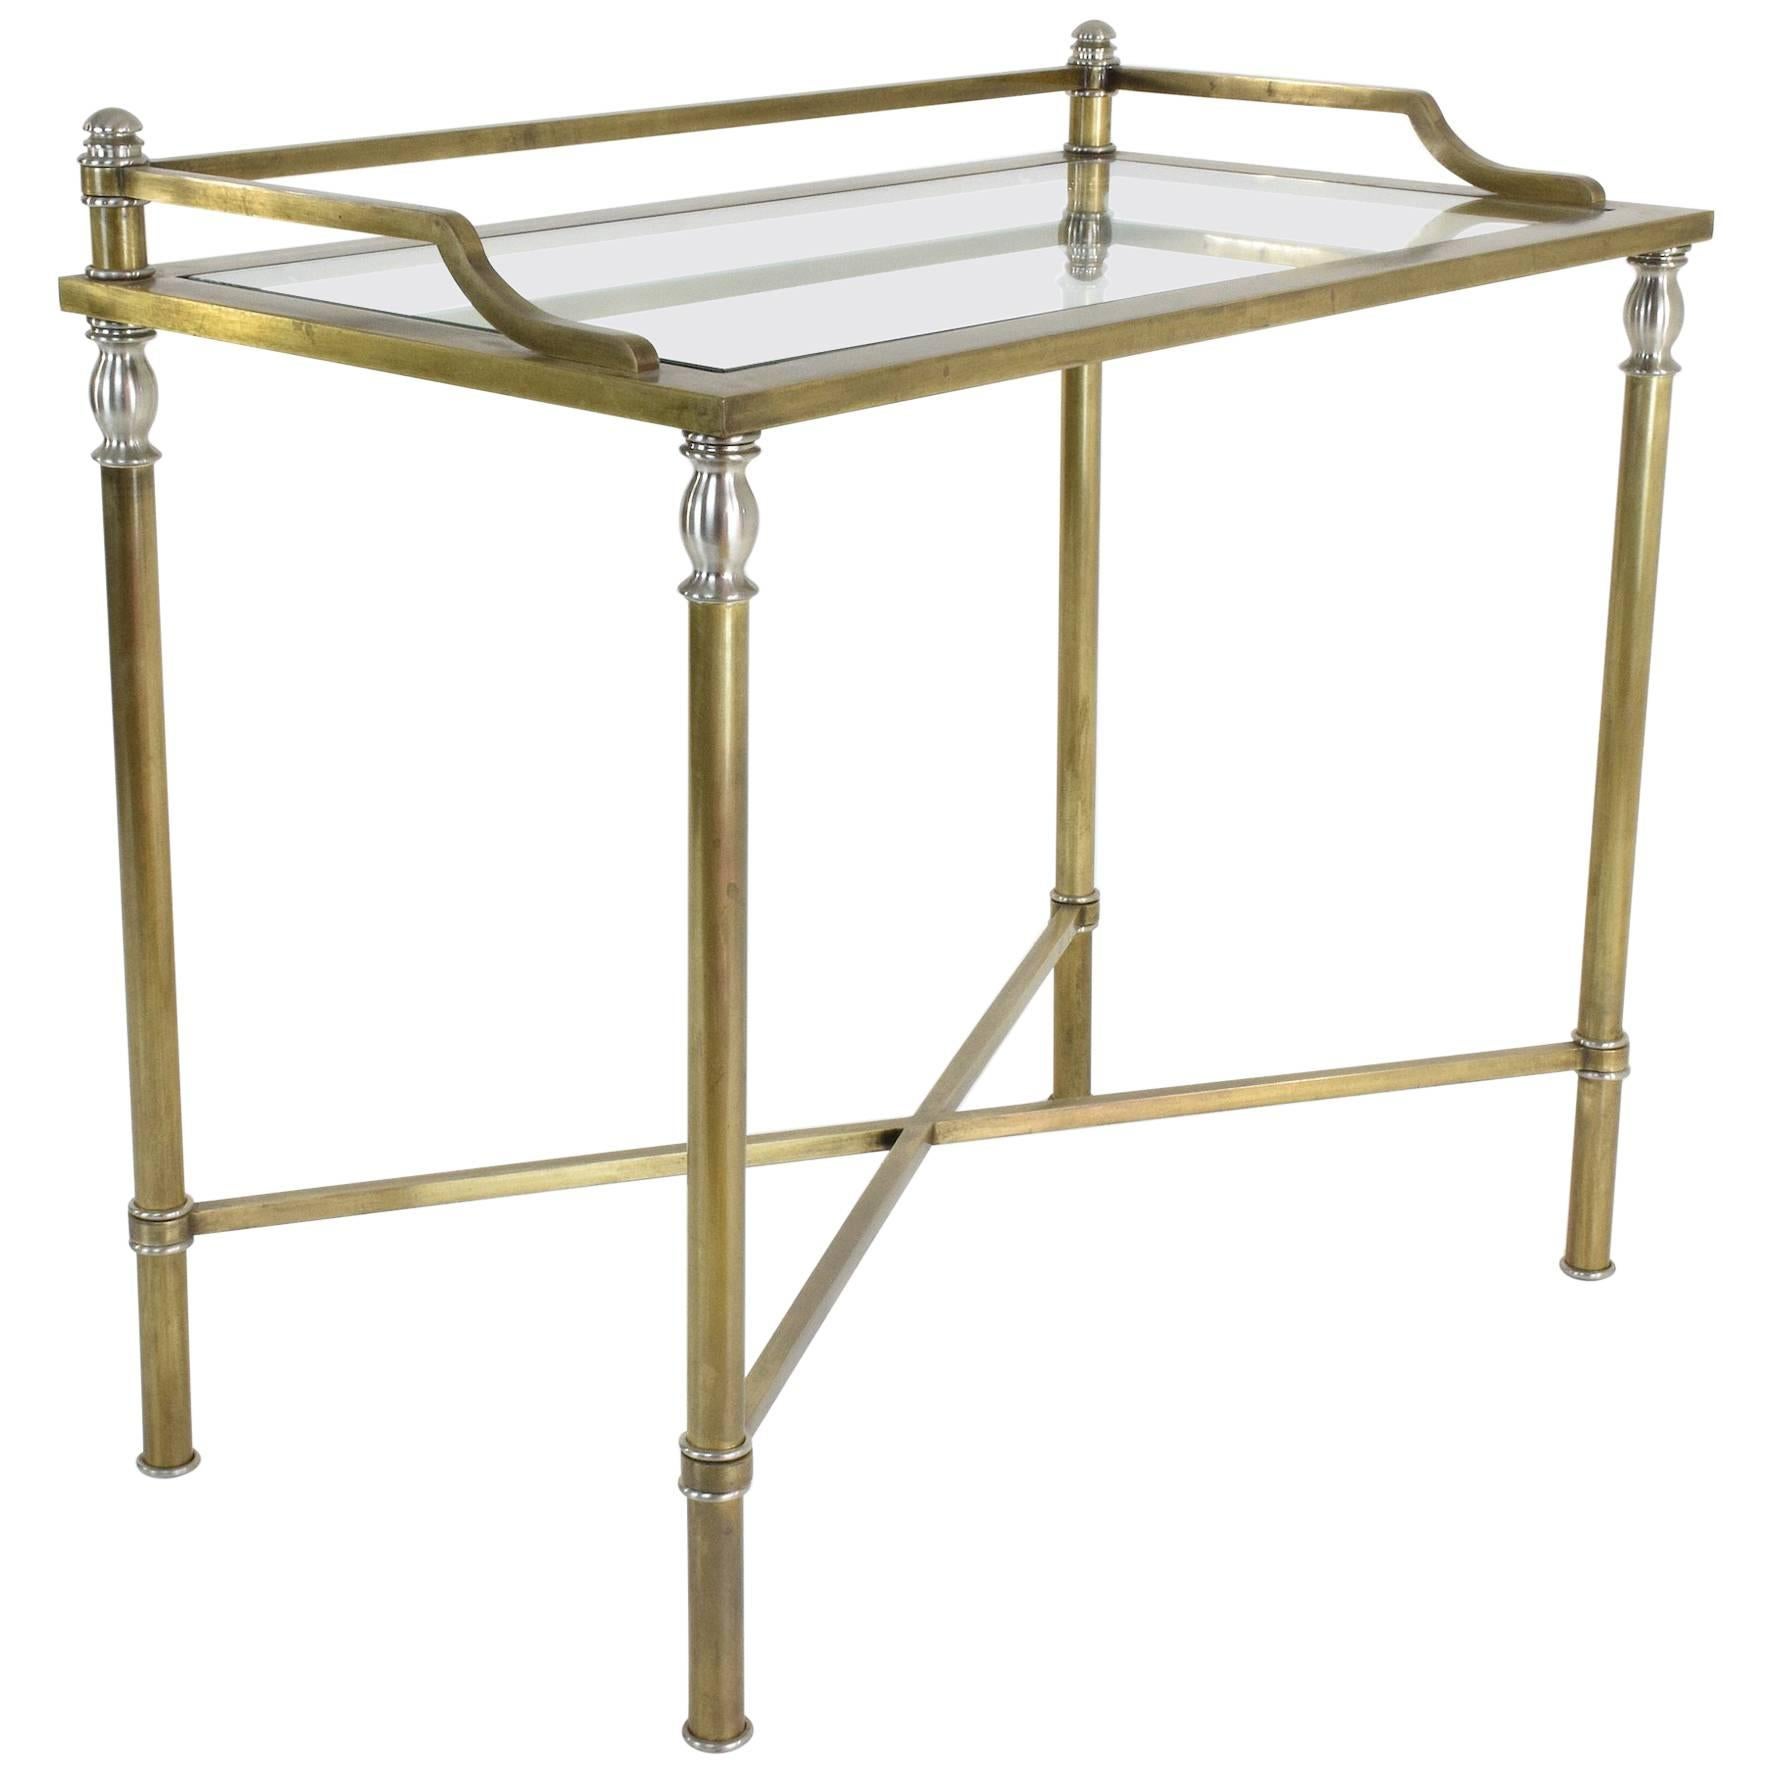 1970s French Brass and Glass Desk, Vanity or Console